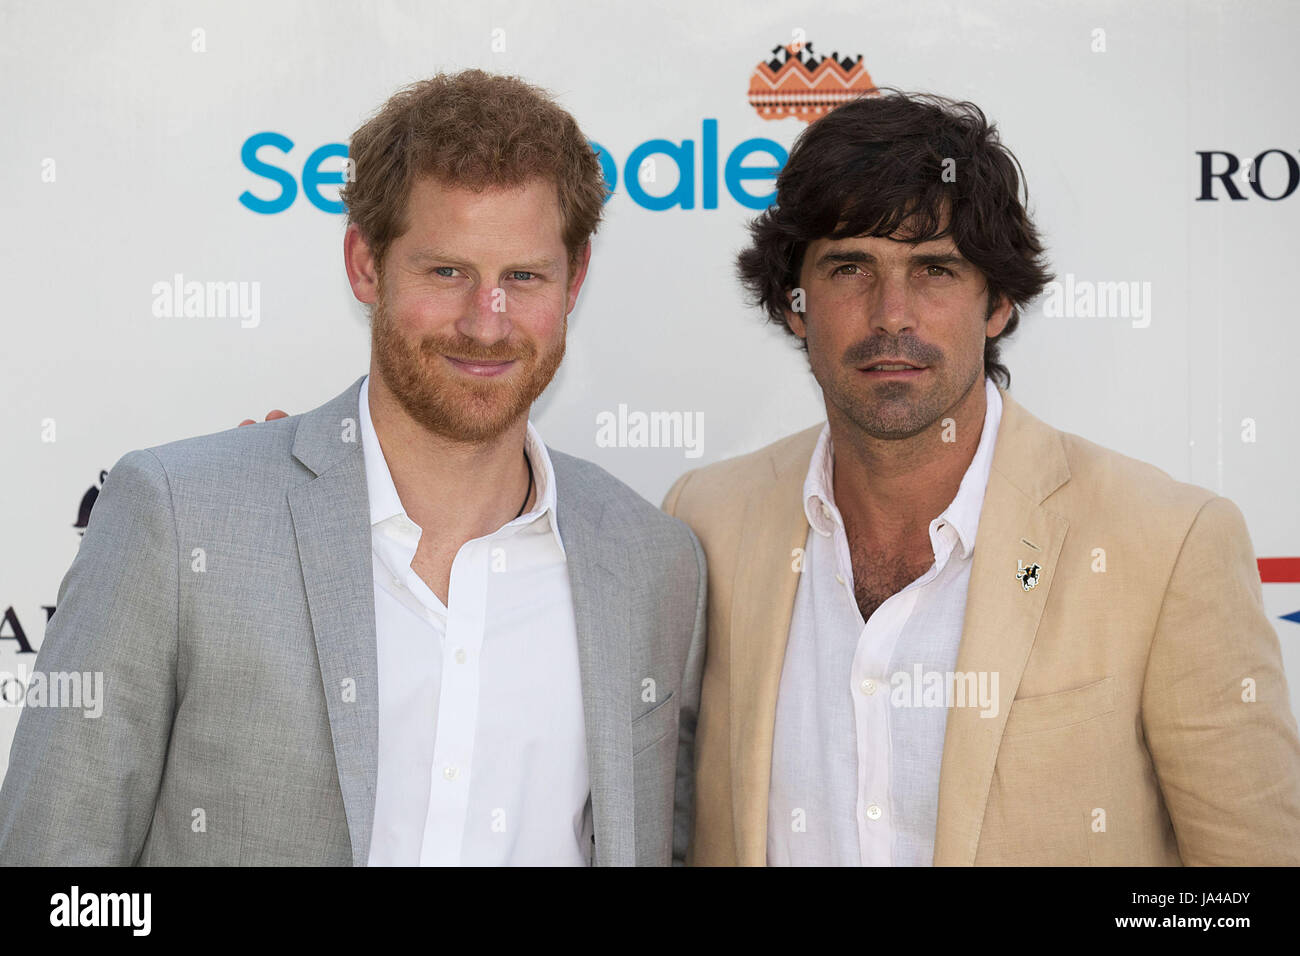 Prince Harry with Nacho Figueras arriving to take part in the Sentebale Royal Salute Polo Cup at the Singapore Polo Club. Stock Photo